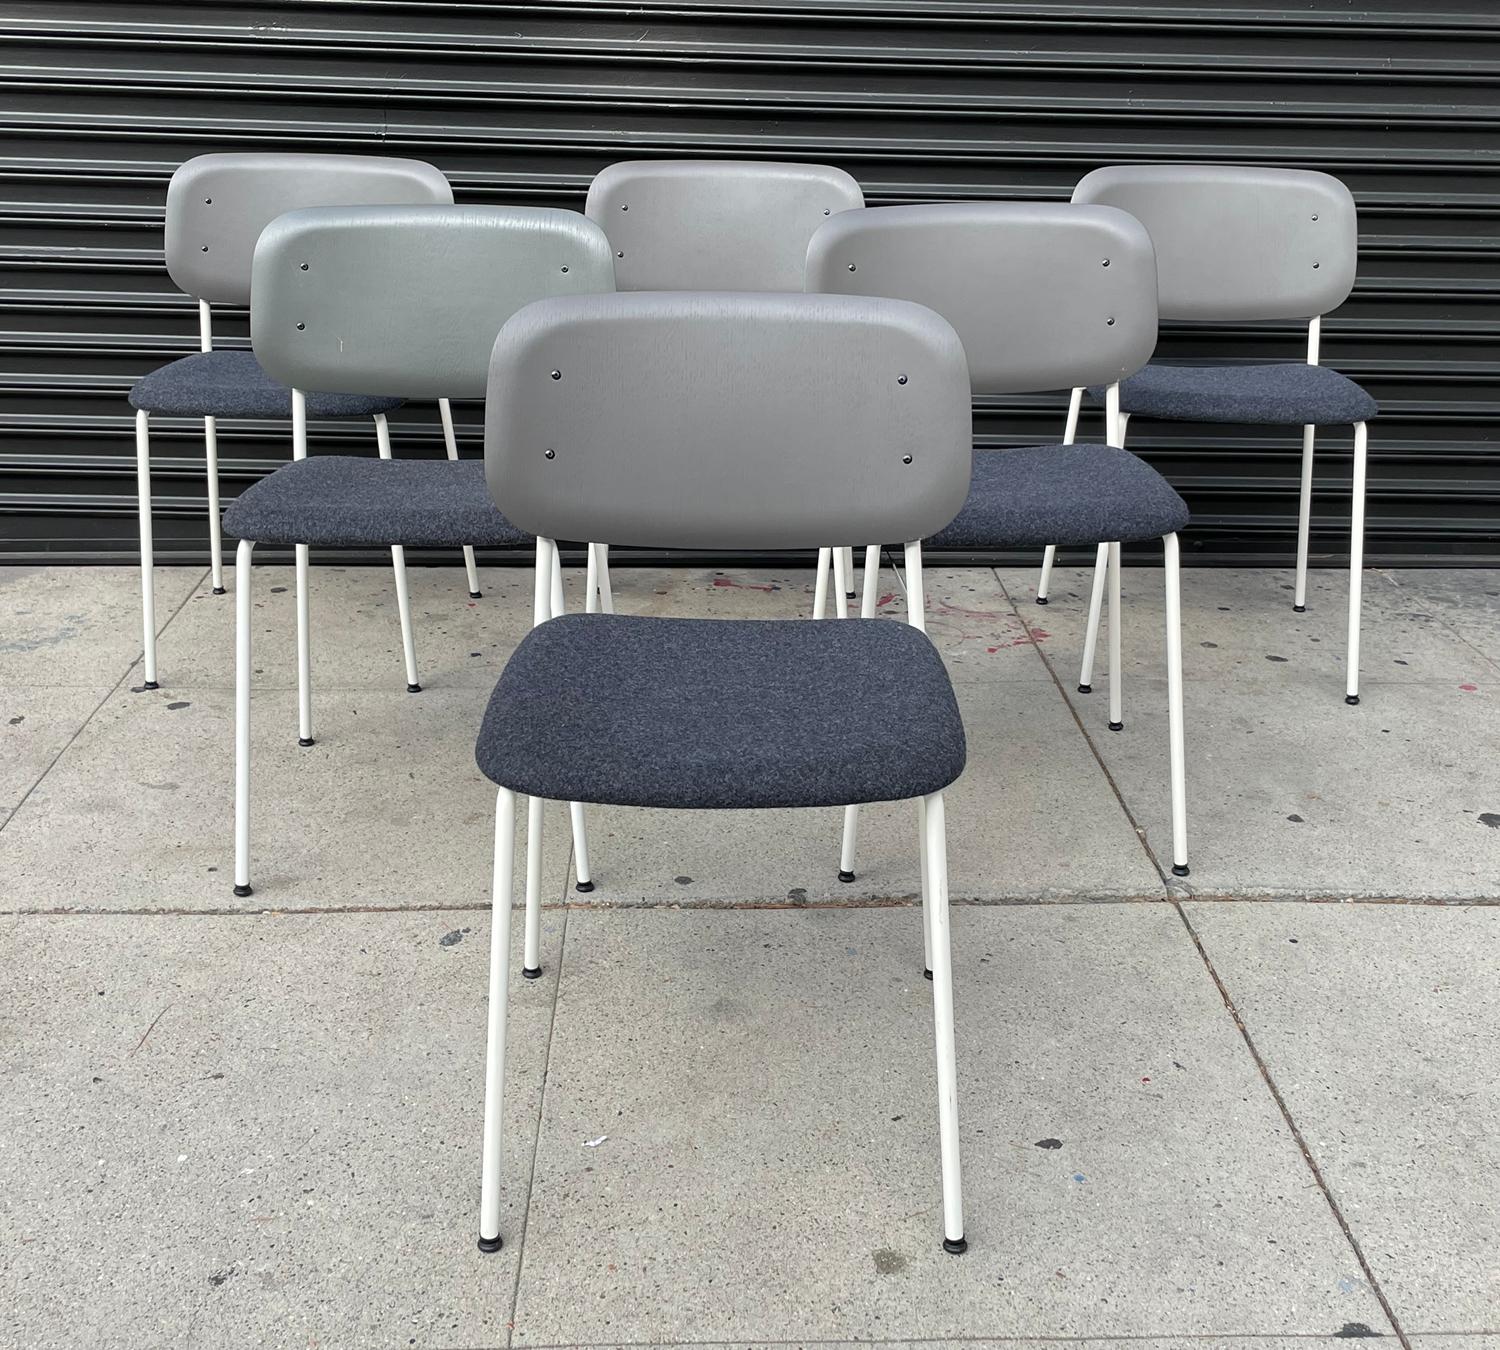 Beautiful set of 6 side or dining chairs designed by Iskos-Berlin for Hay furniture.
The chairs are stackable which are perfect for small spaces.

Molded plywood seat and back; tubular steel legs; fabric seat upholstery; plastic floor